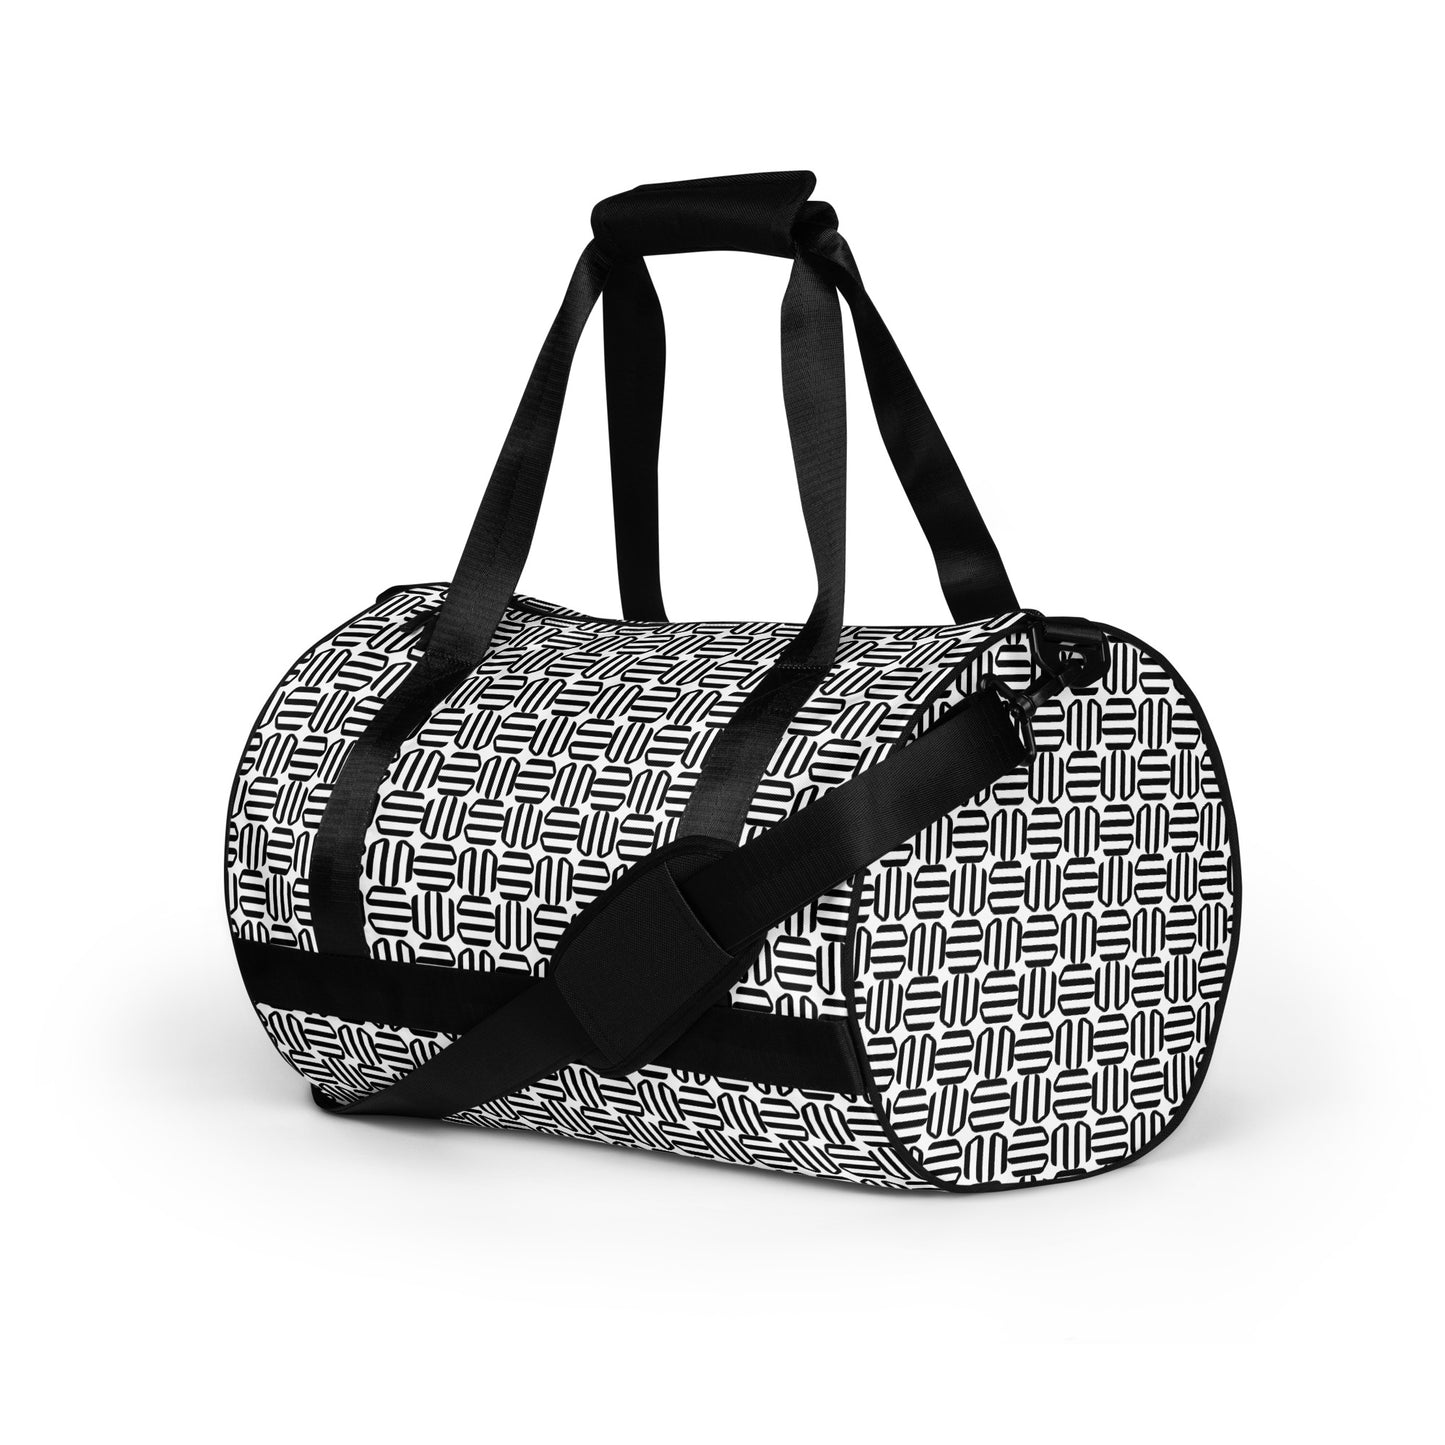 WE pattern All-over print gym bag